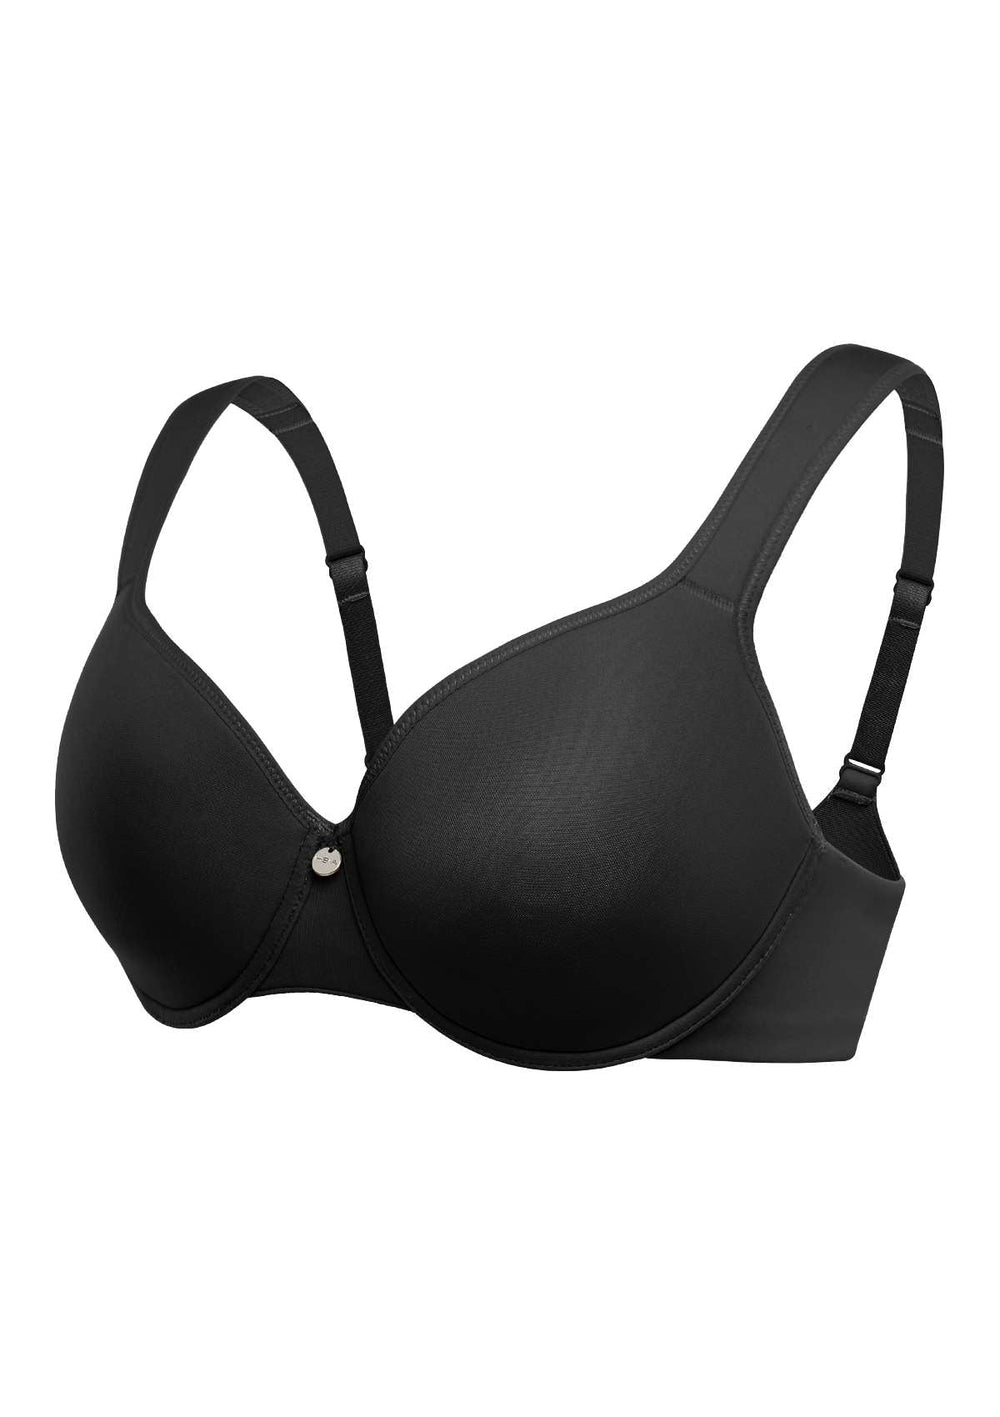 🥳Plus Size T-Shirt Bra Is Here! Smooth Classic Lightly Padded Bra🙌 - Hsia